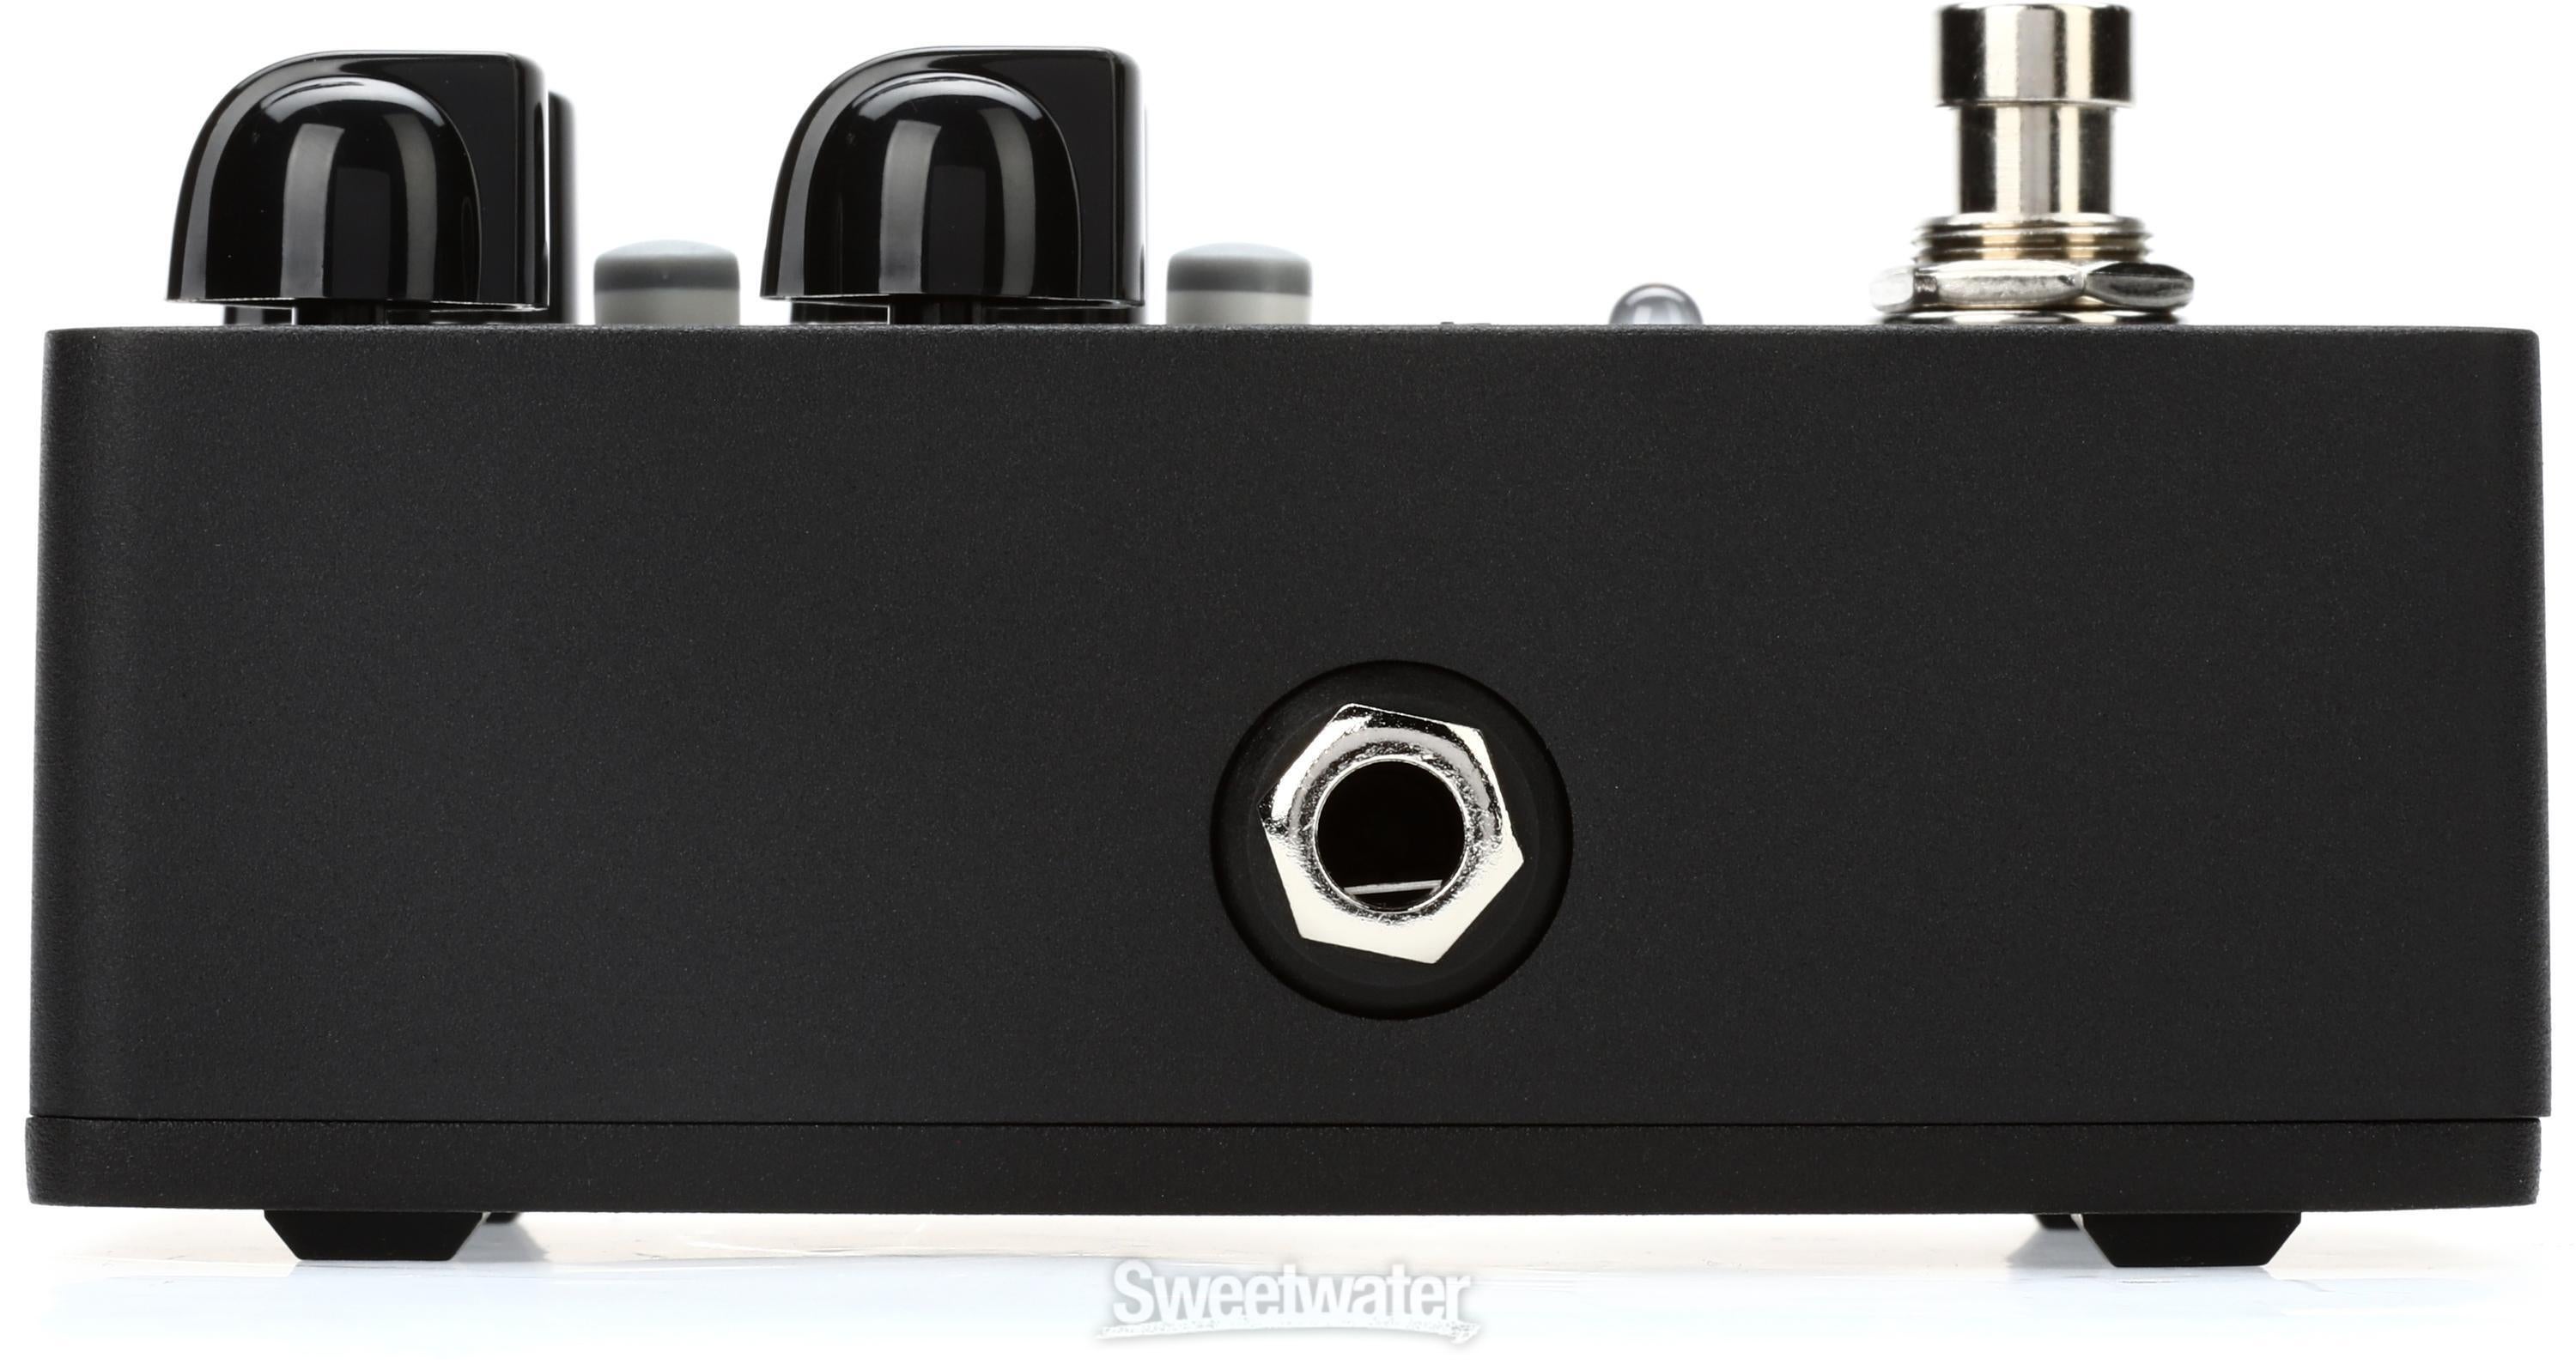 Ampeg Classic Analog Bass Preamp Pedal | Sweetwater